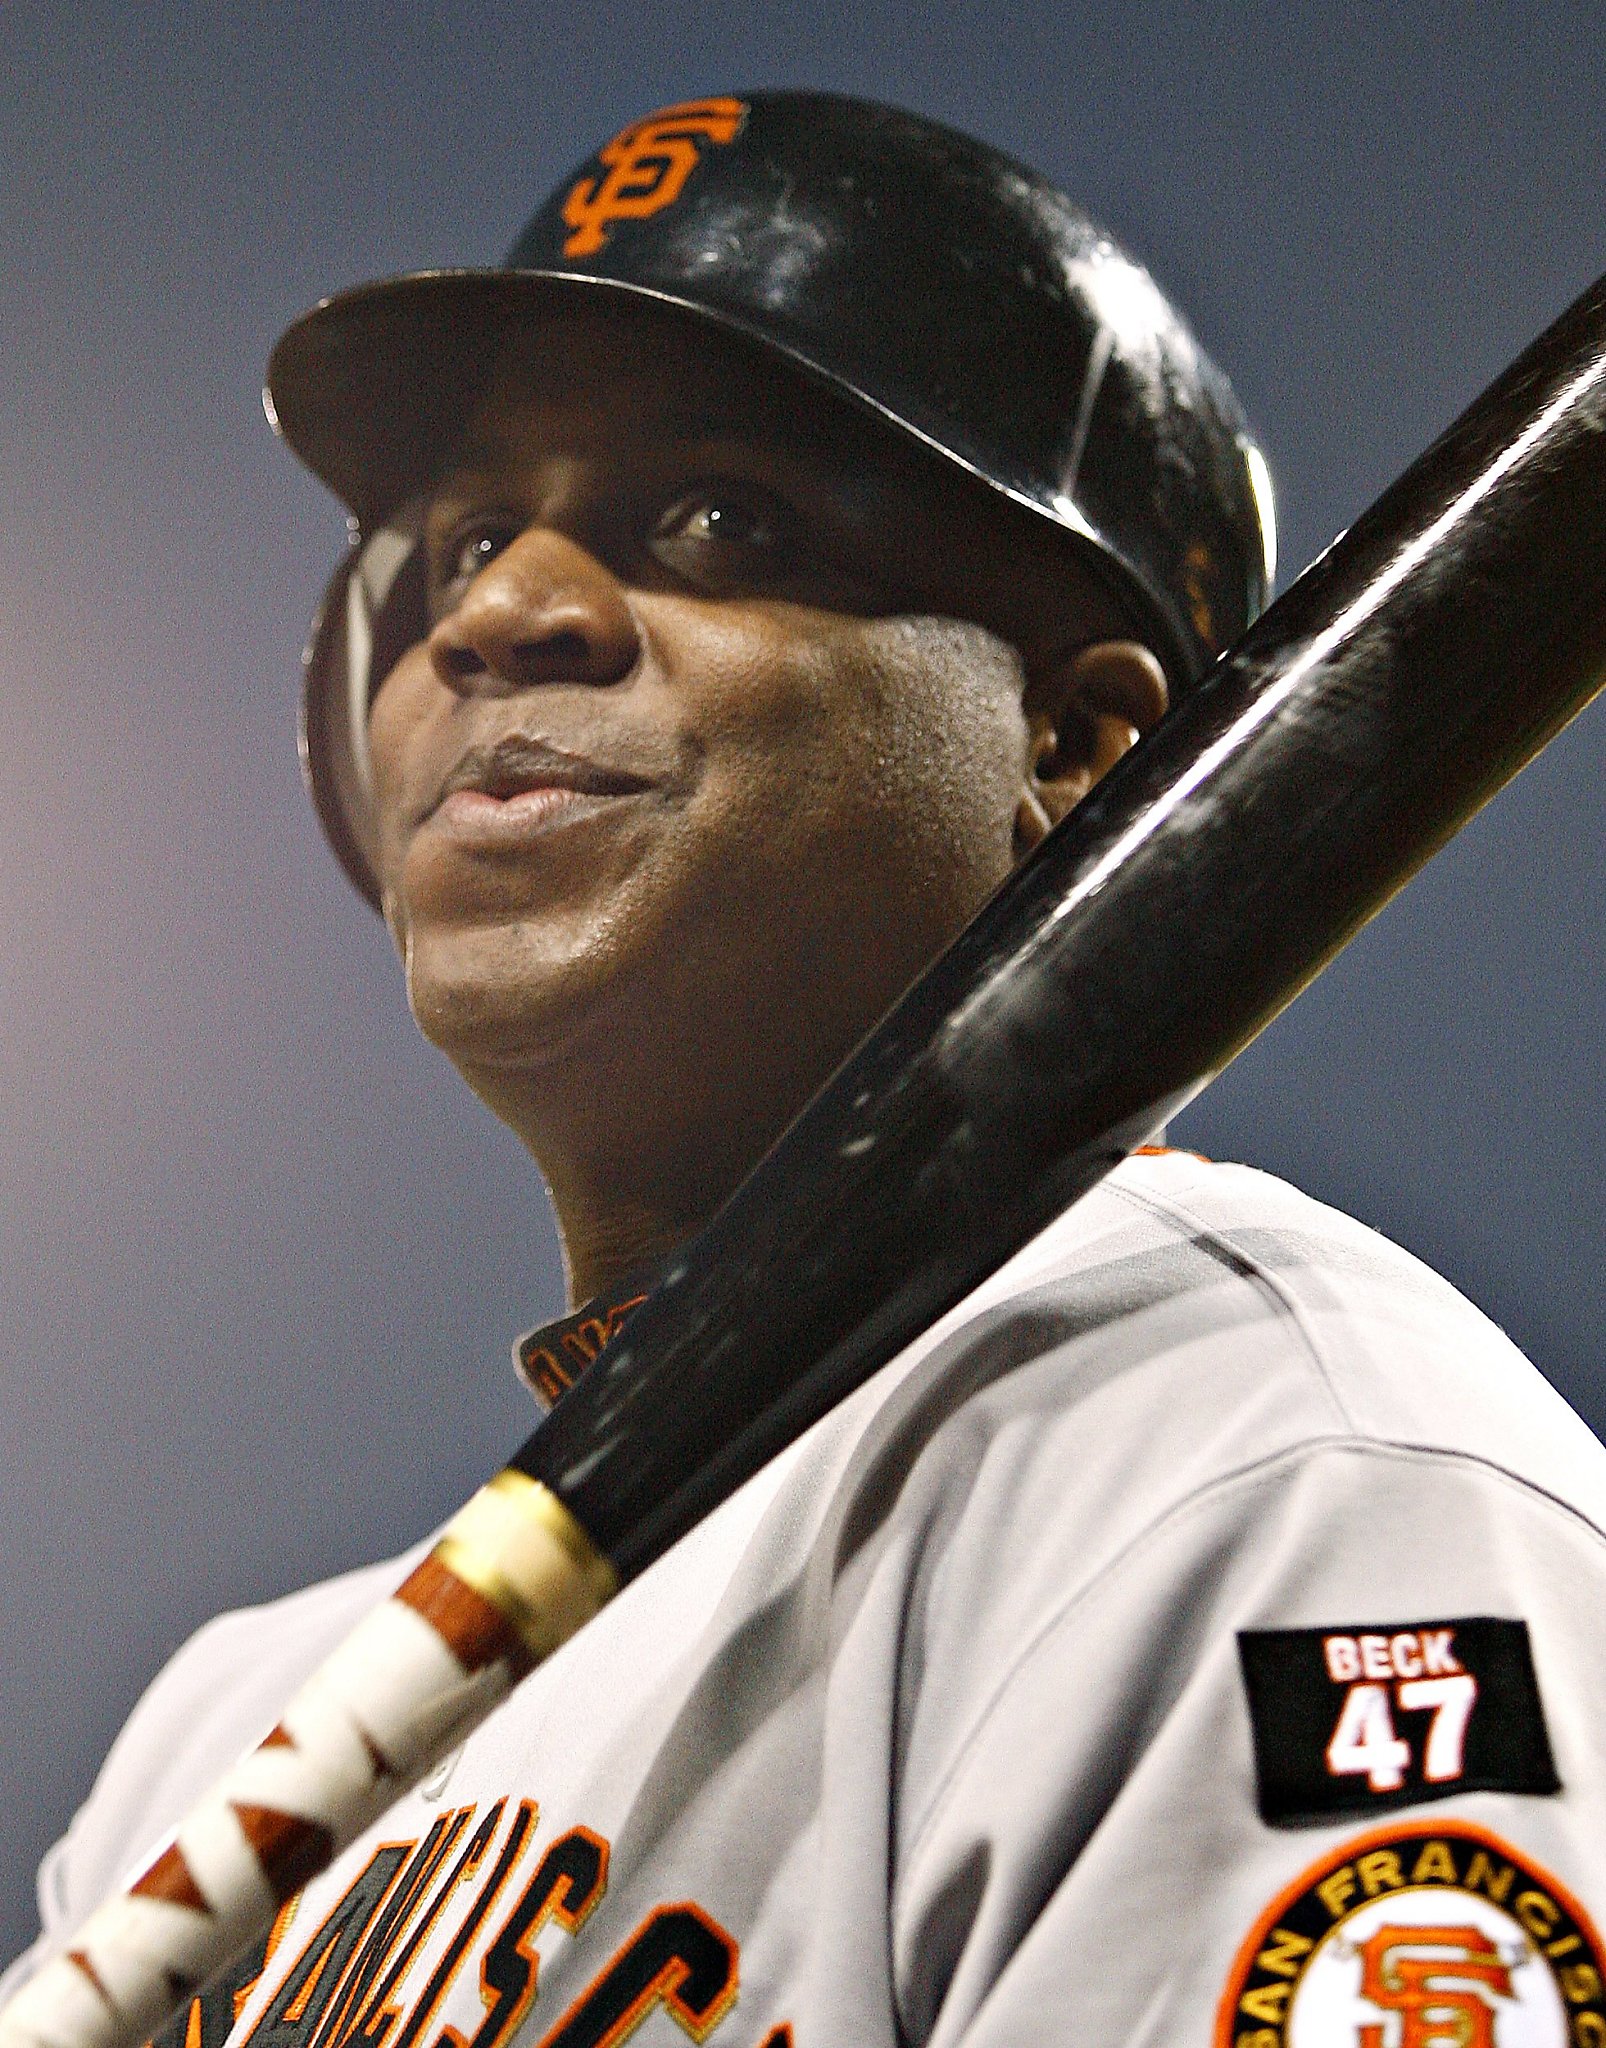 For Giants and Barry Bonds, jersey retirement is evolution of